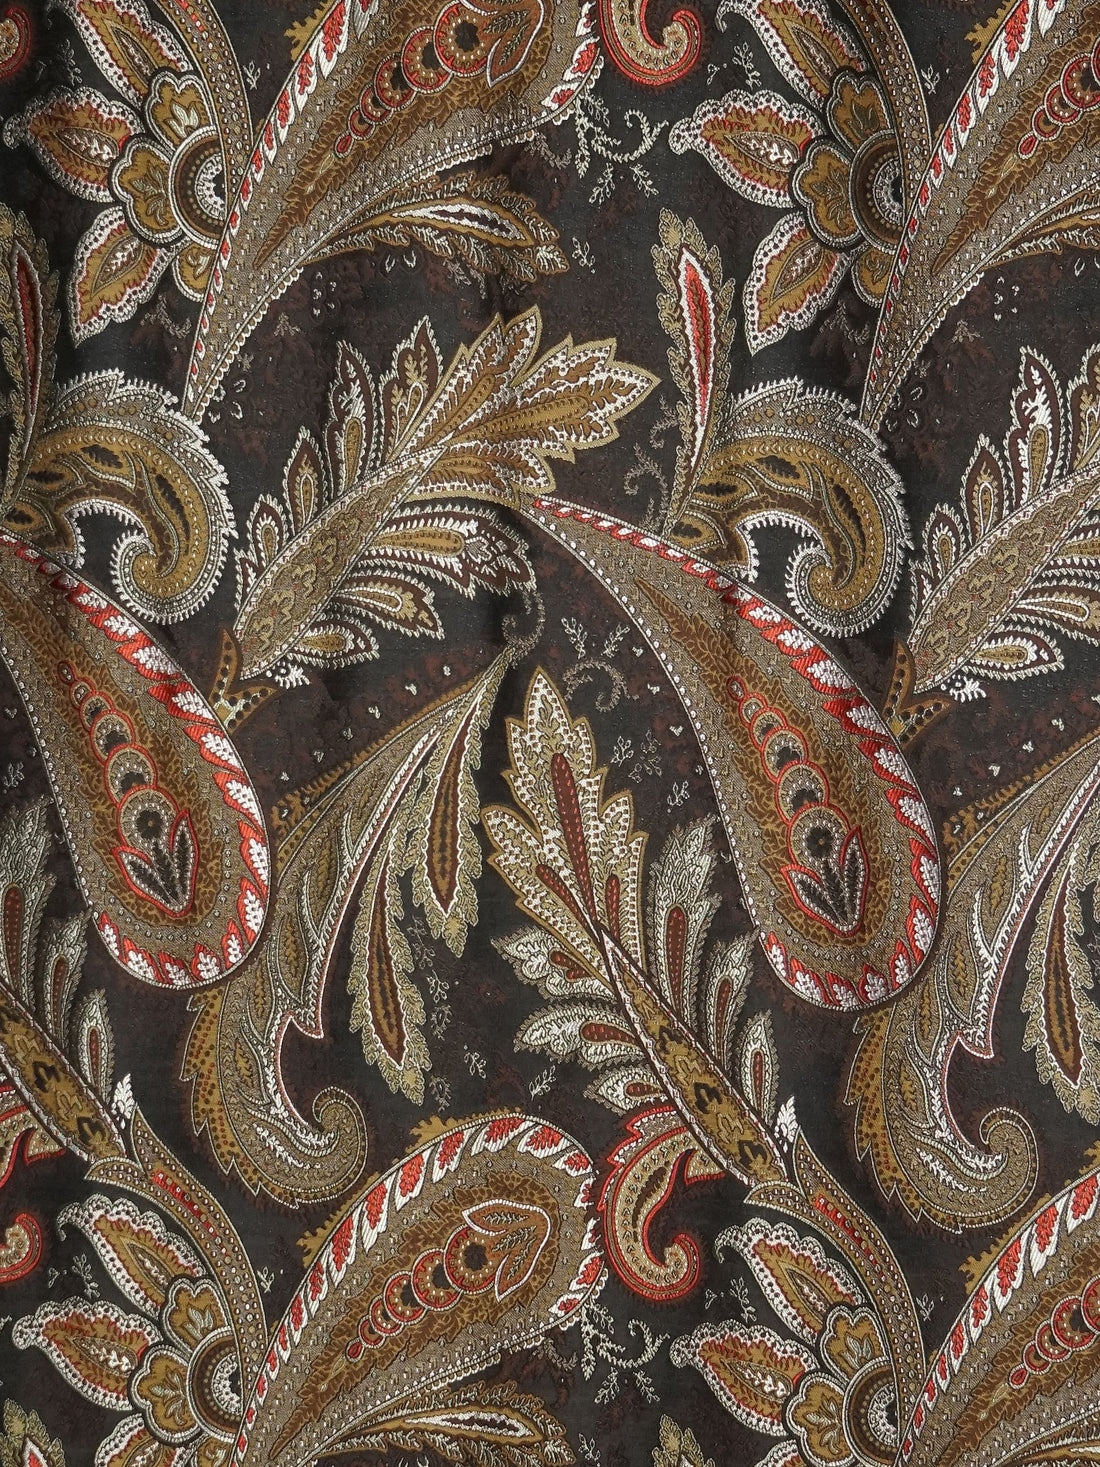 Paisiello fabric in black coral color - pattern number SB 00011058 - by Scalamandre in the Old World Weavers collection